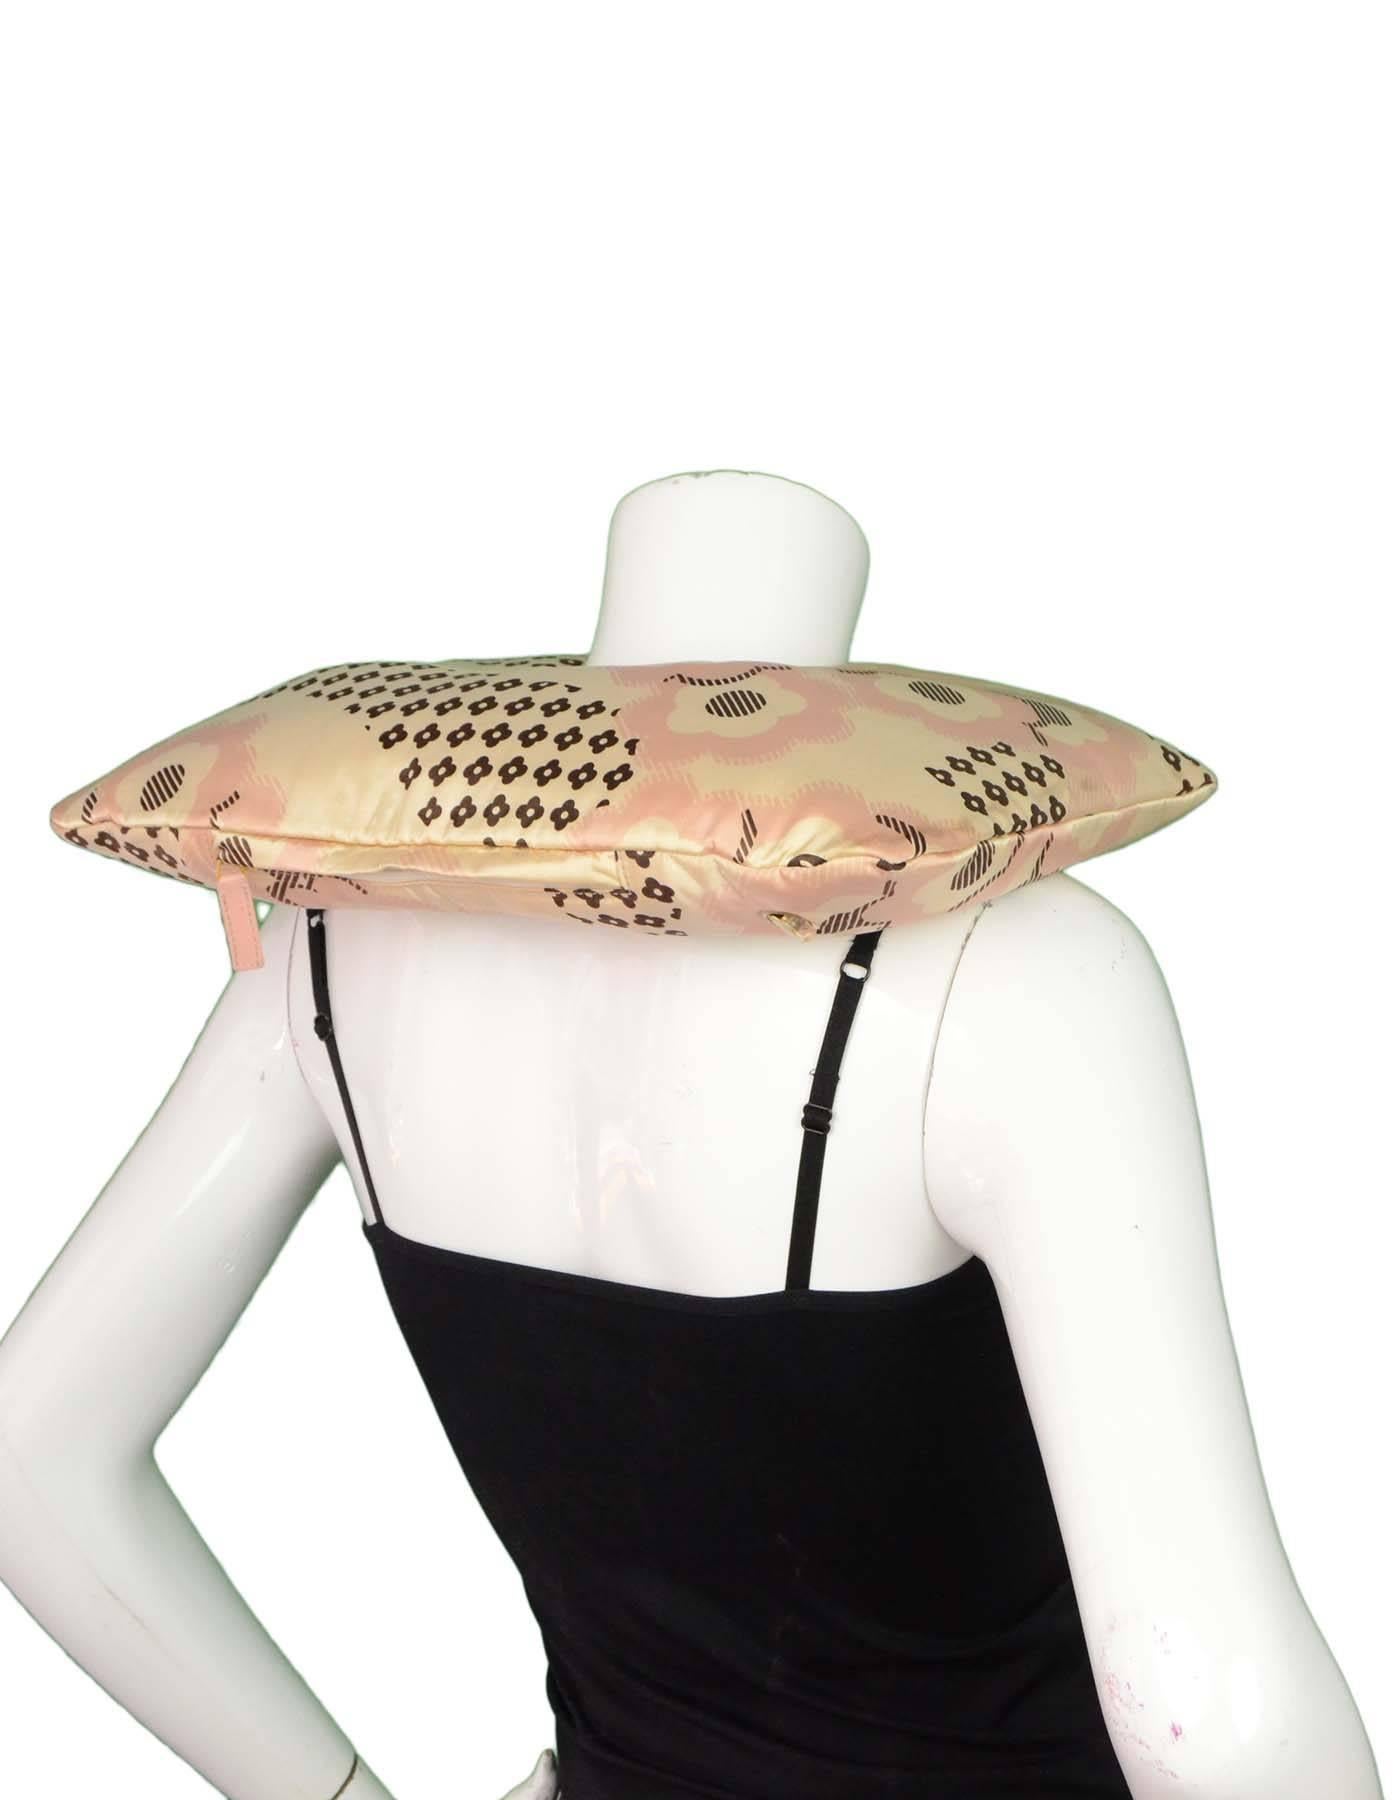 Chanel Pink Silk Travel Neck Pillow

Features CC and floral print throughout 

Color: Pink, nude, brown
Composition: Not listed, believed to be silk blend
Overall Condition: Very good pre-owned condition with the exception of gentle wear